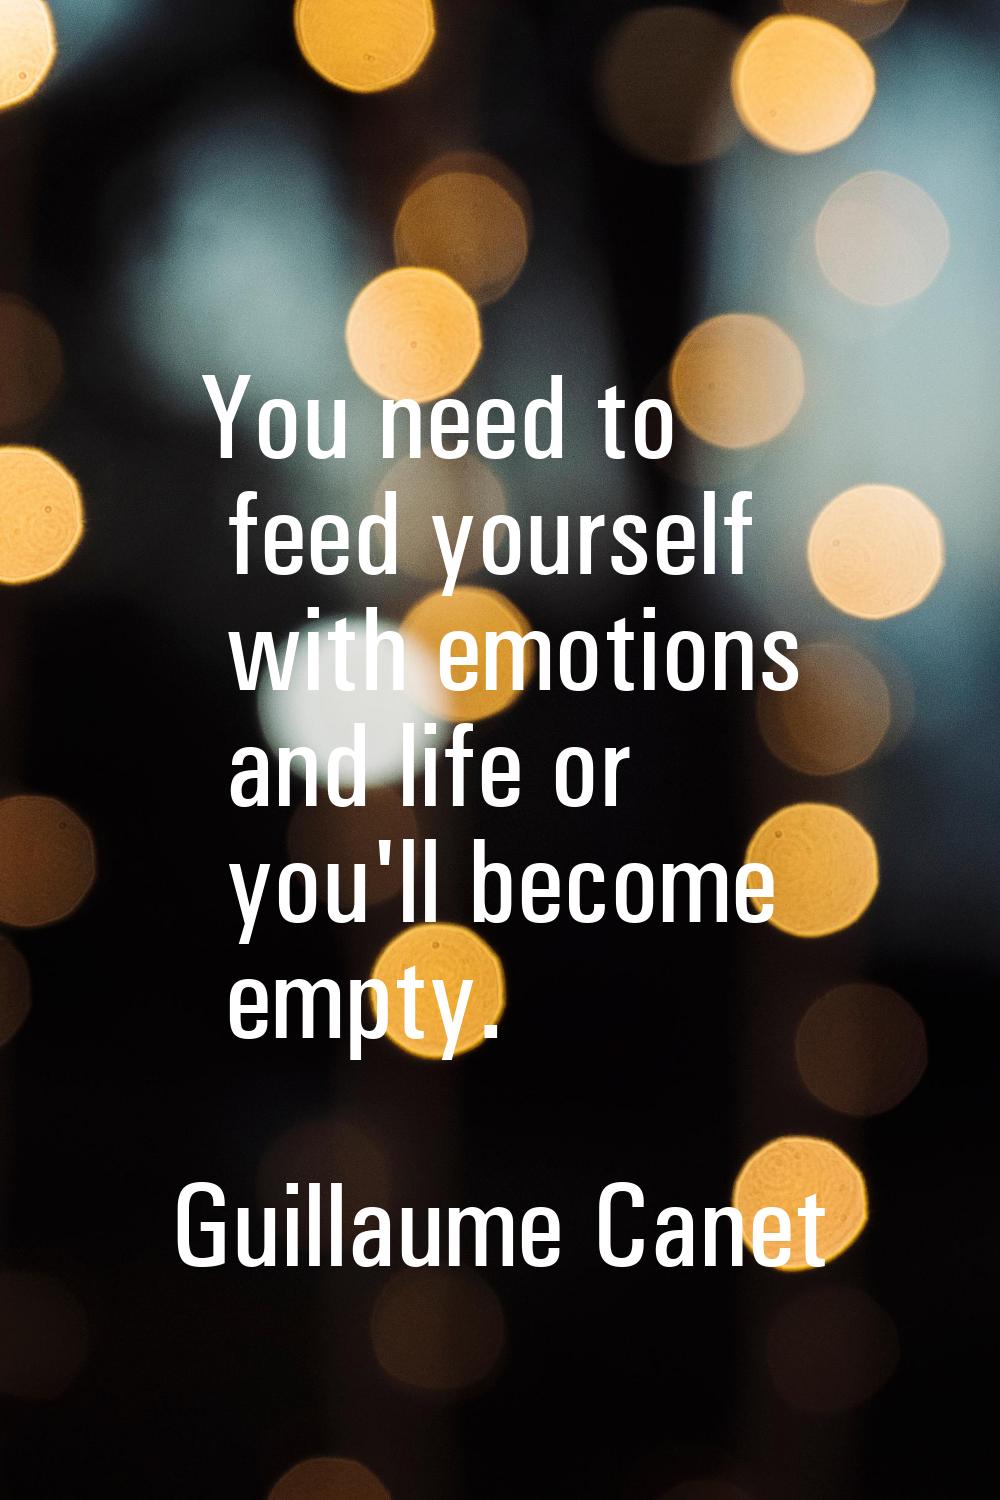 You need to feed yourself with emotions and life or you'll become empty.